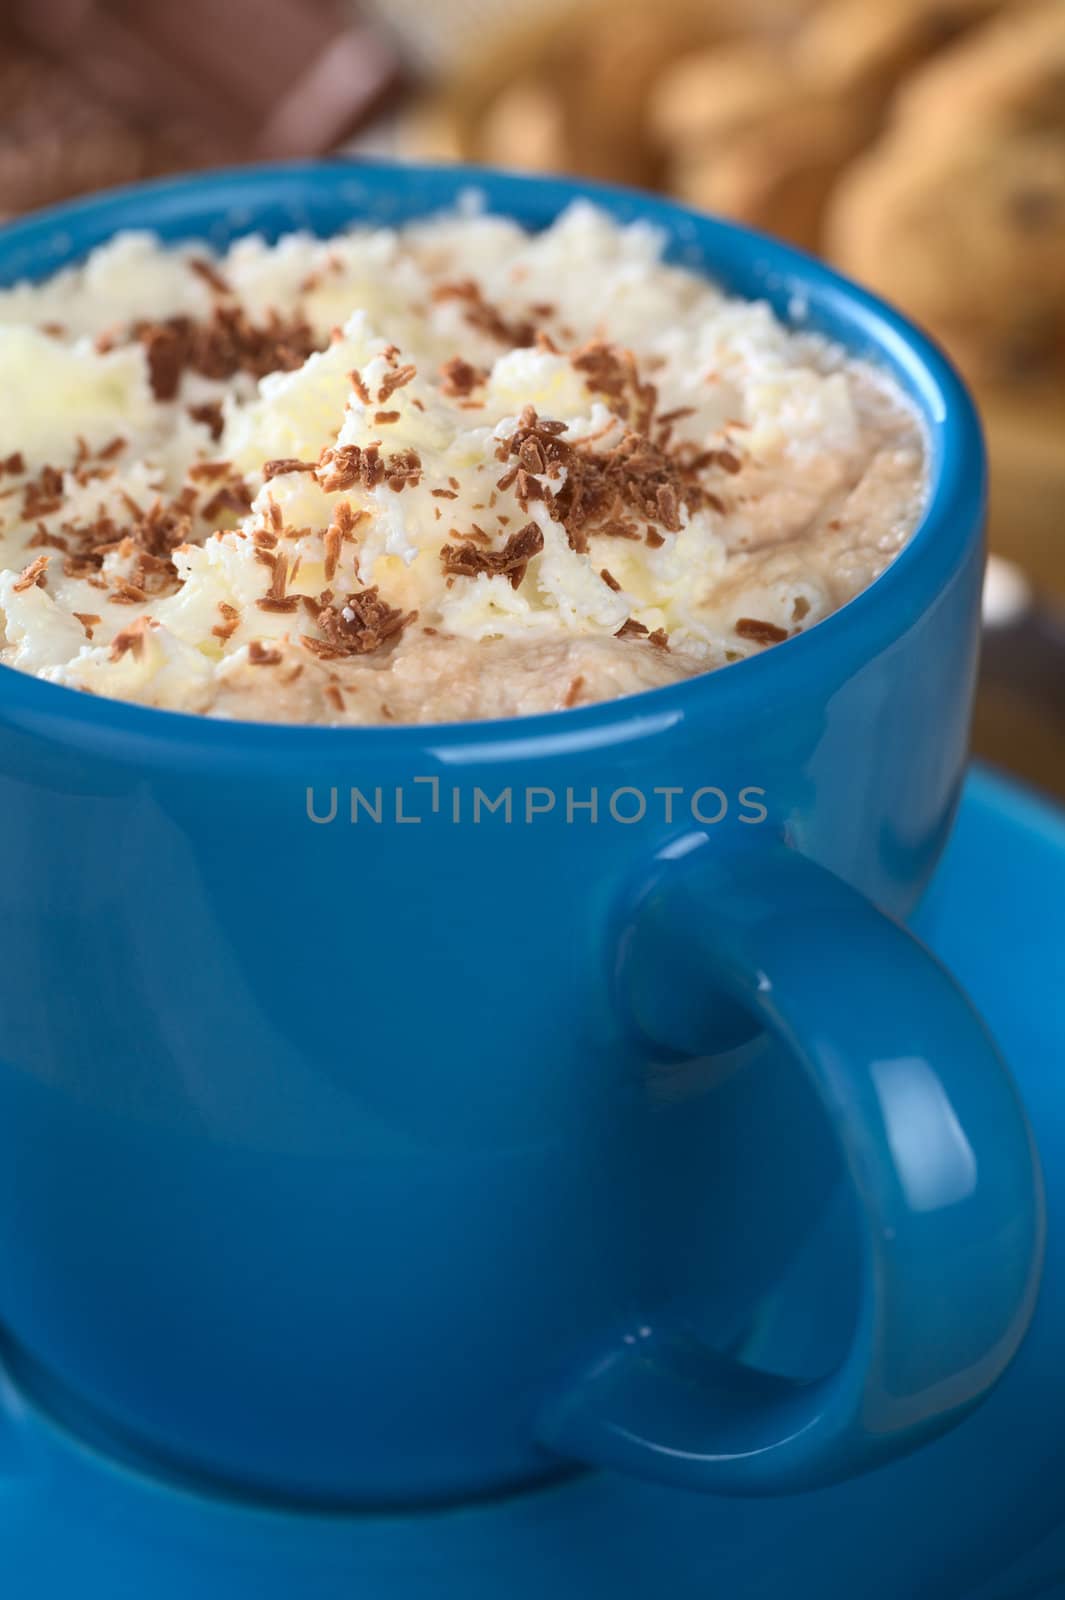 Hot chocolate with whipped cream and chocolate shavings in blue cup with cookies and chocolate in the back (Selective Focus, Focus on the top of the cream)